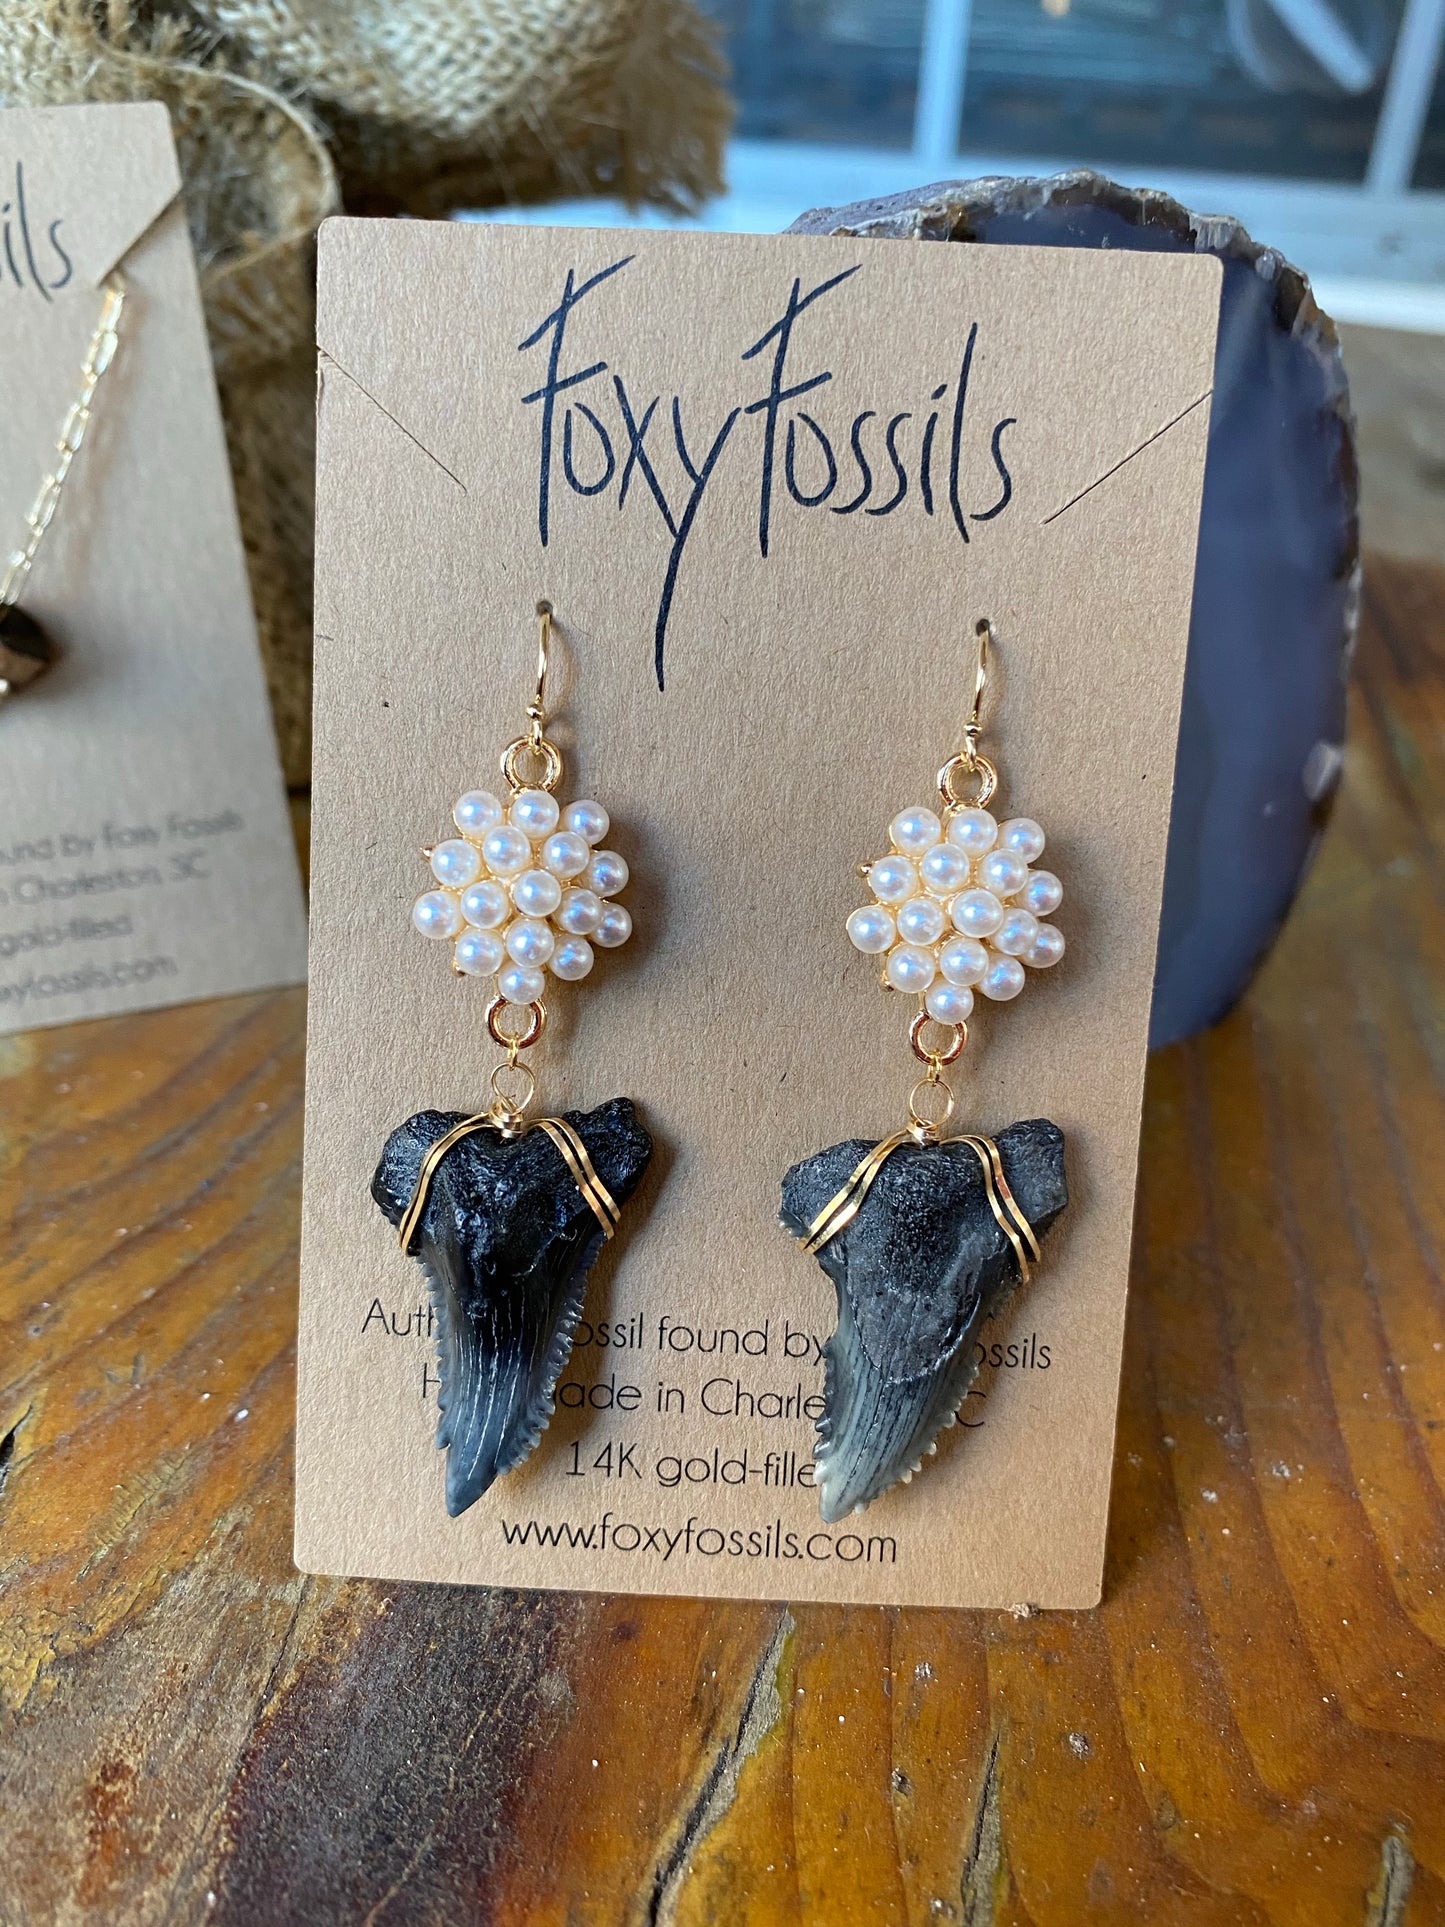 hemipristis serra snaggletooth shark teeth earrings with pearls 14kt gold filled— Foxy Fossils 